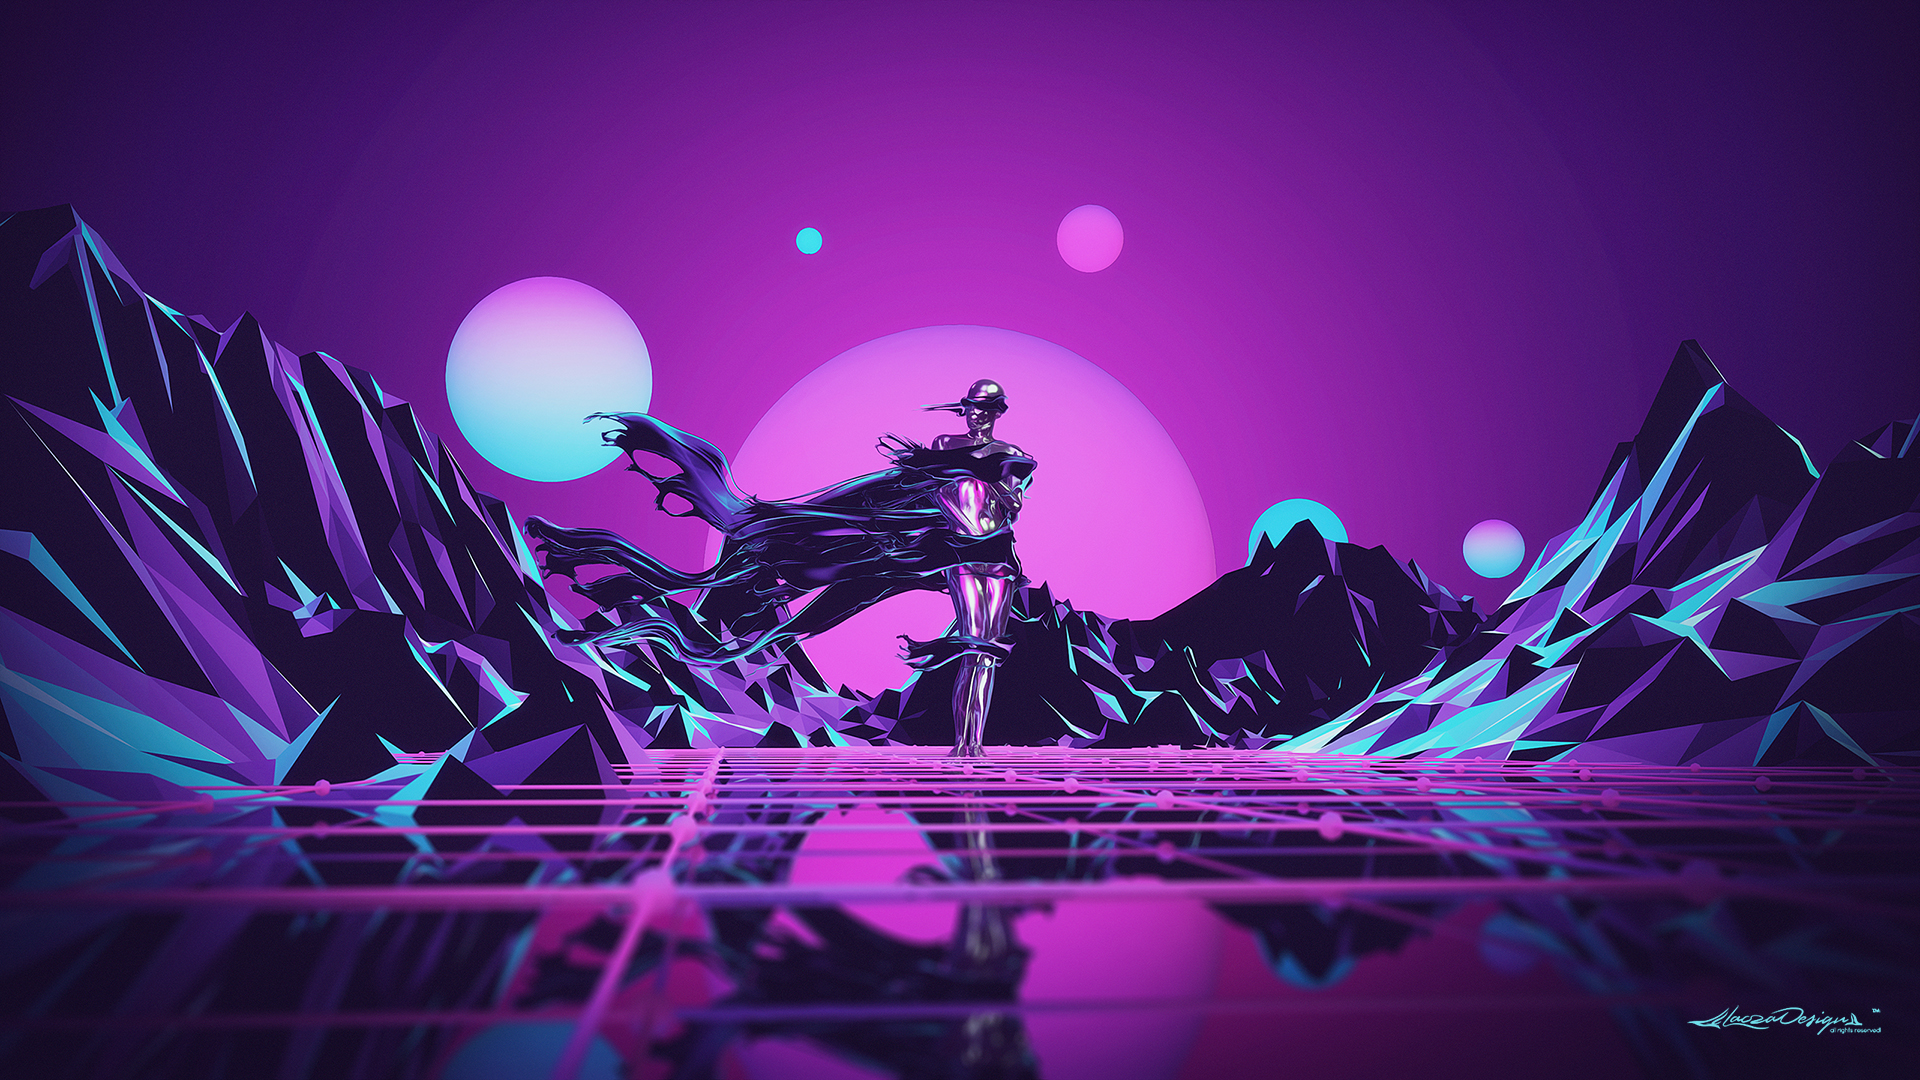 General 1920x1080 abstract Lacza low poly retro style